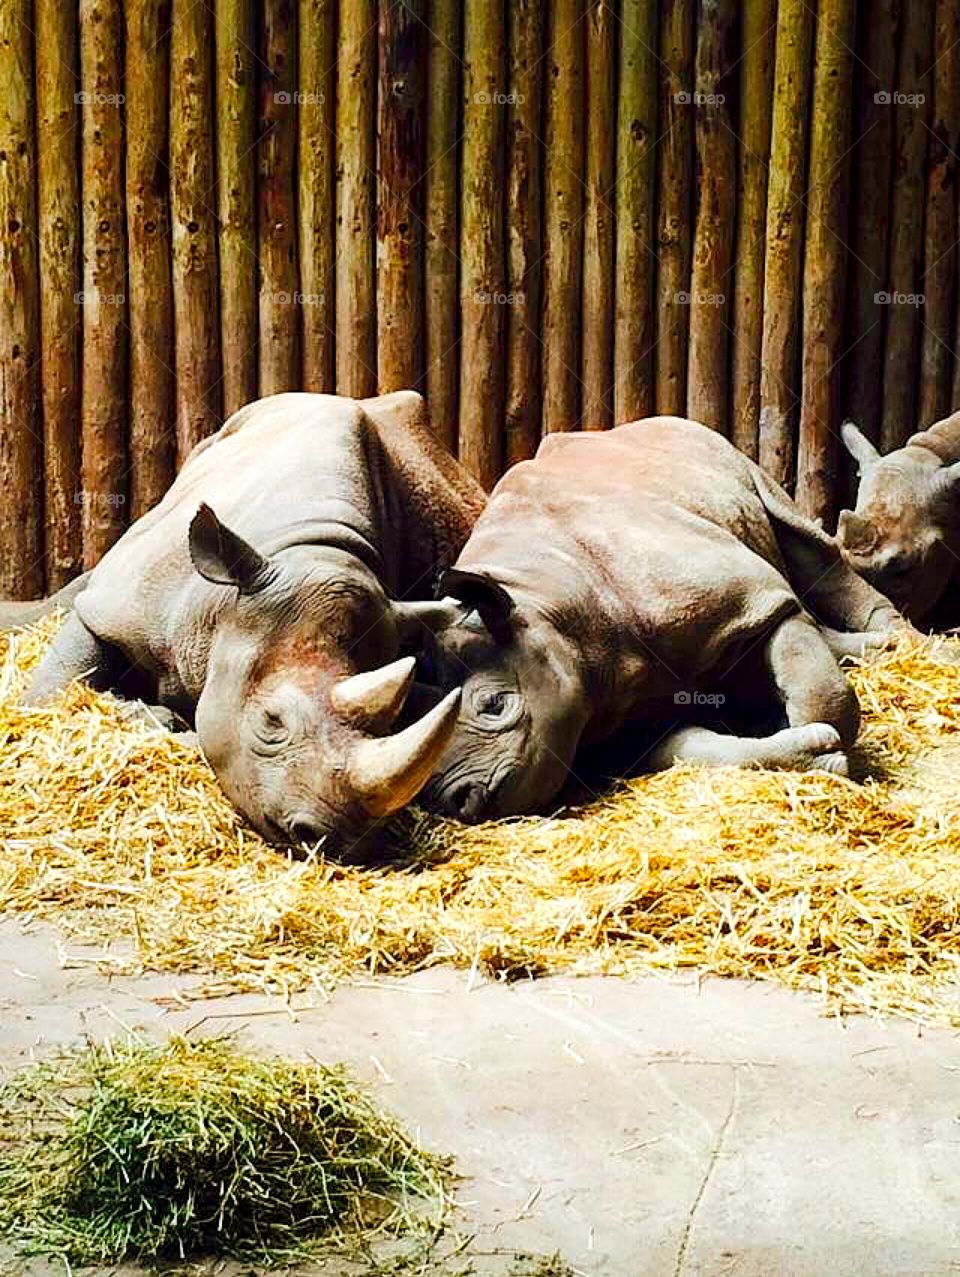 Just a couple of rhinos having a rest. 